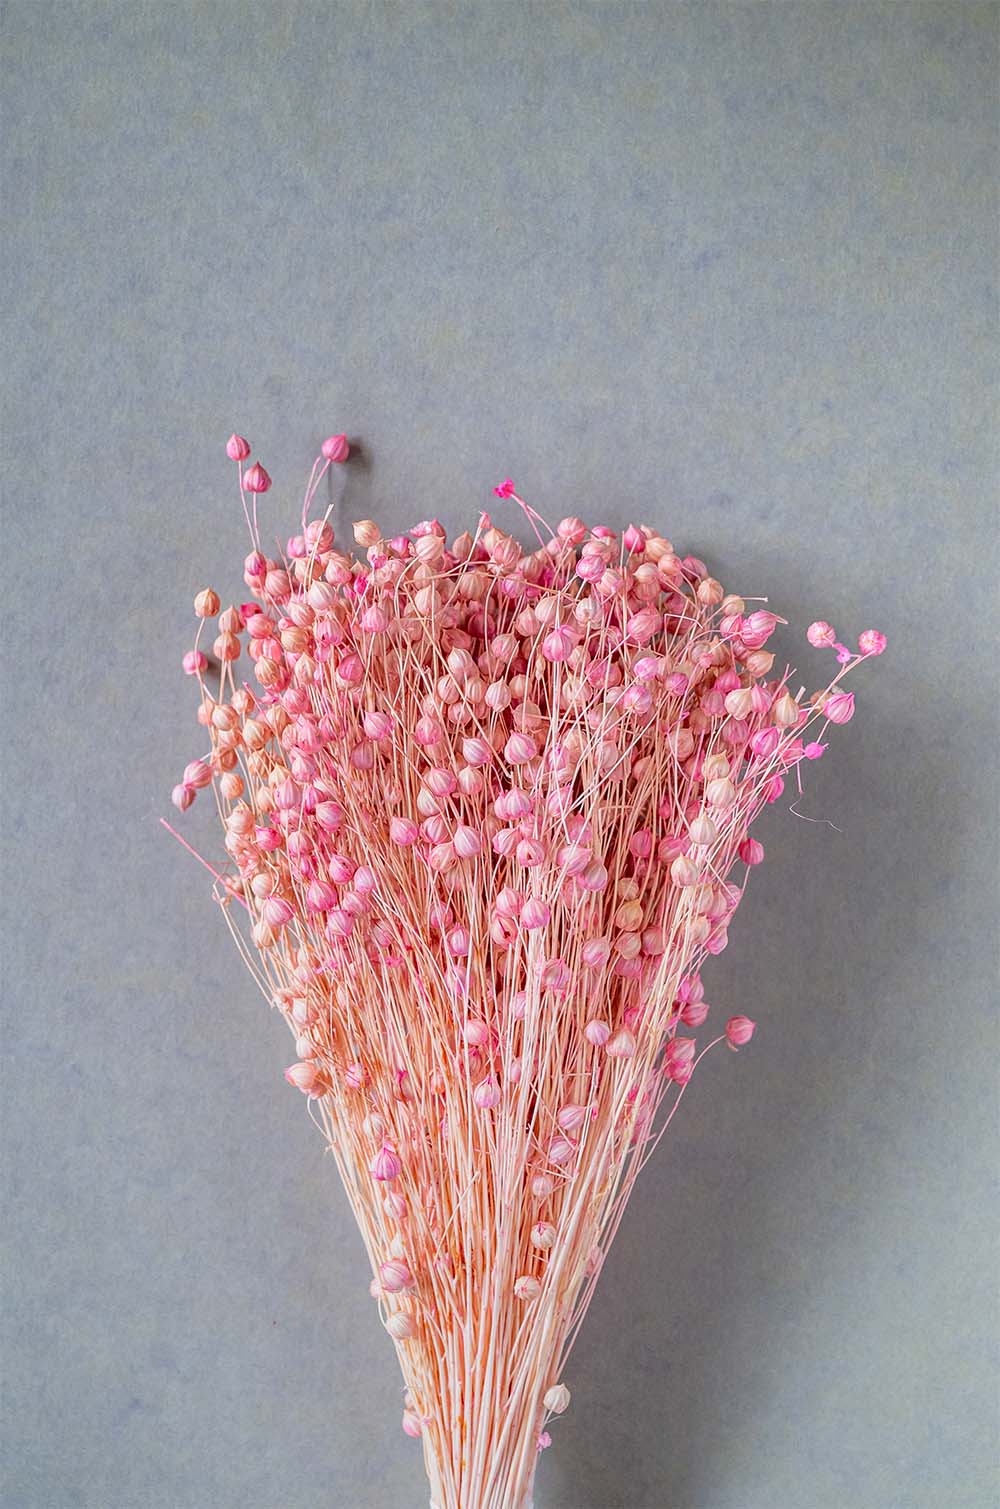 Bouquet of natural dried flowers